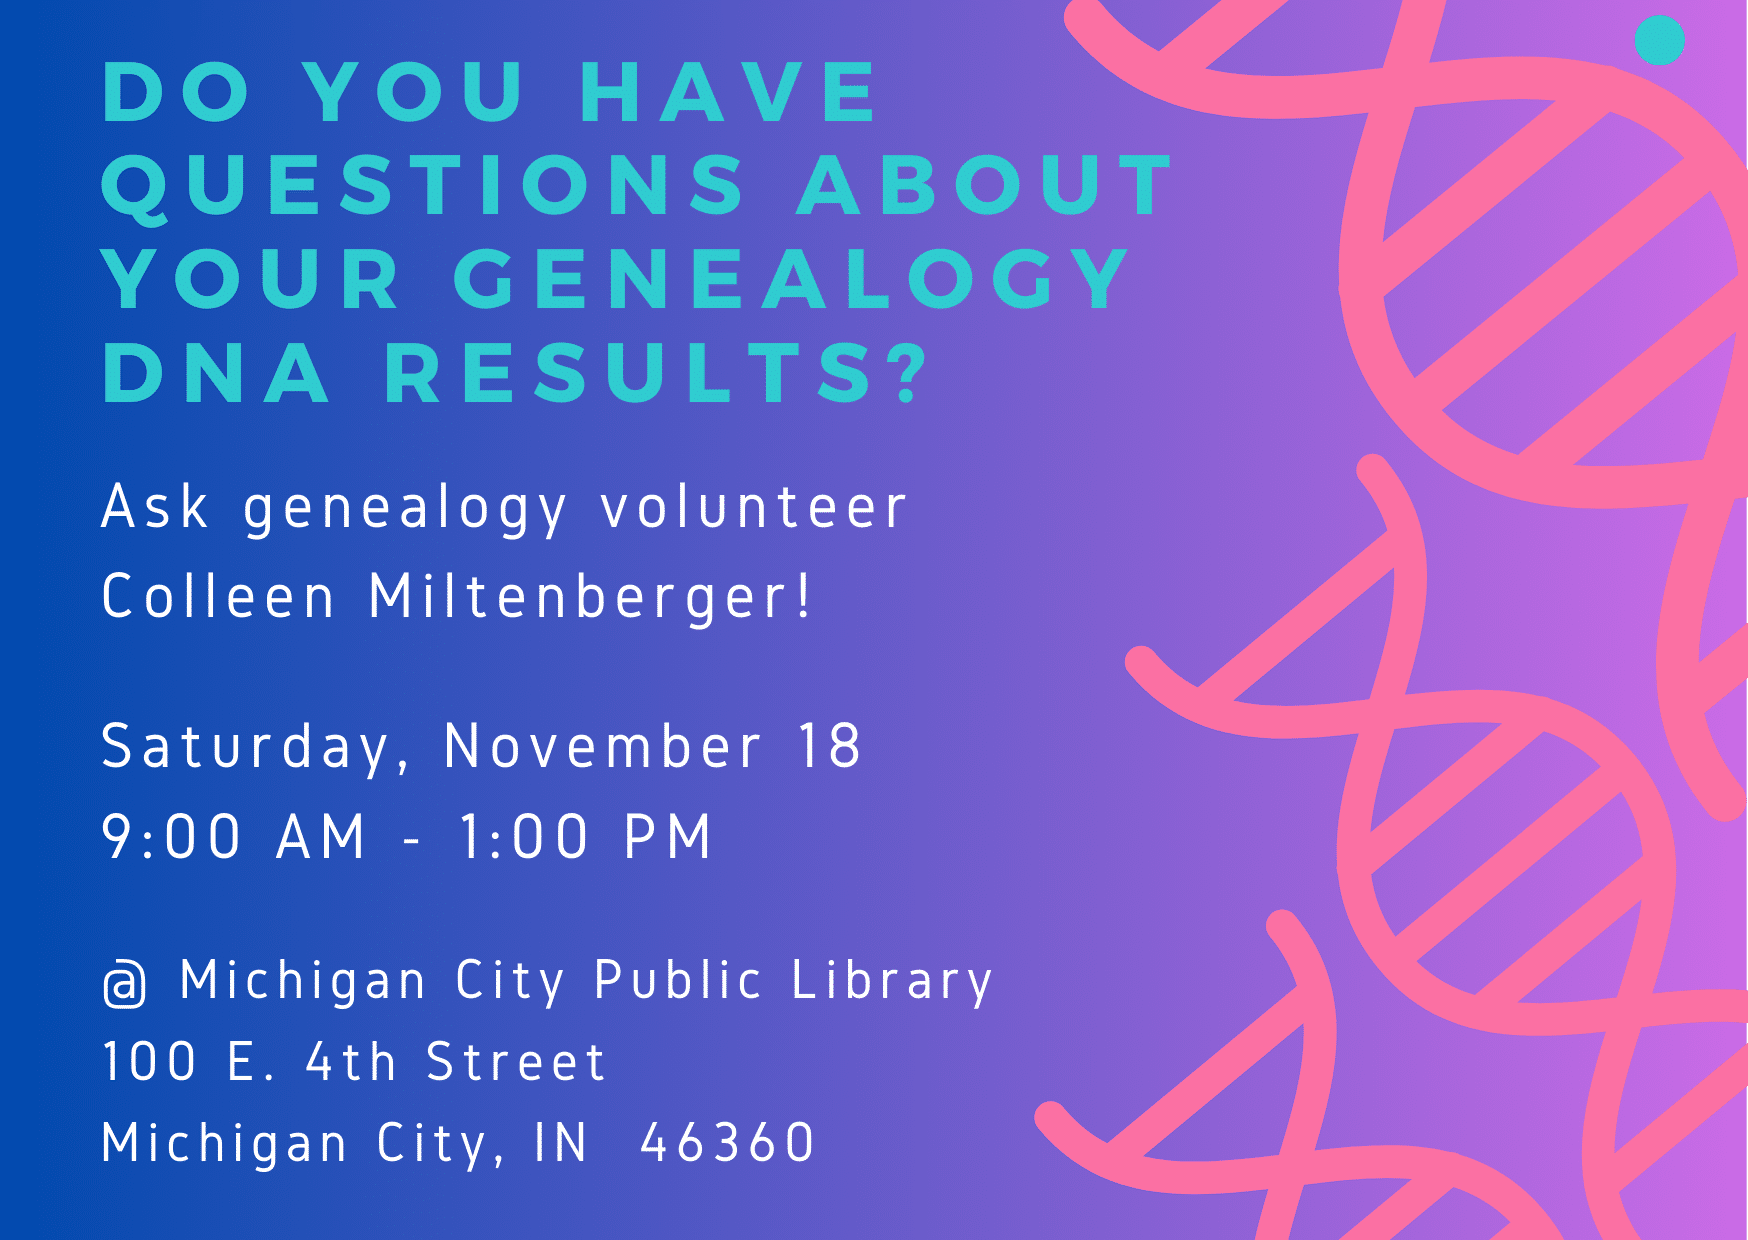 Do you have questions about your genealogy DNA results? Ask genealogy volunteer Colleen Miltenberger! Saturday, November 18, 9:00 am - 1:00 pm